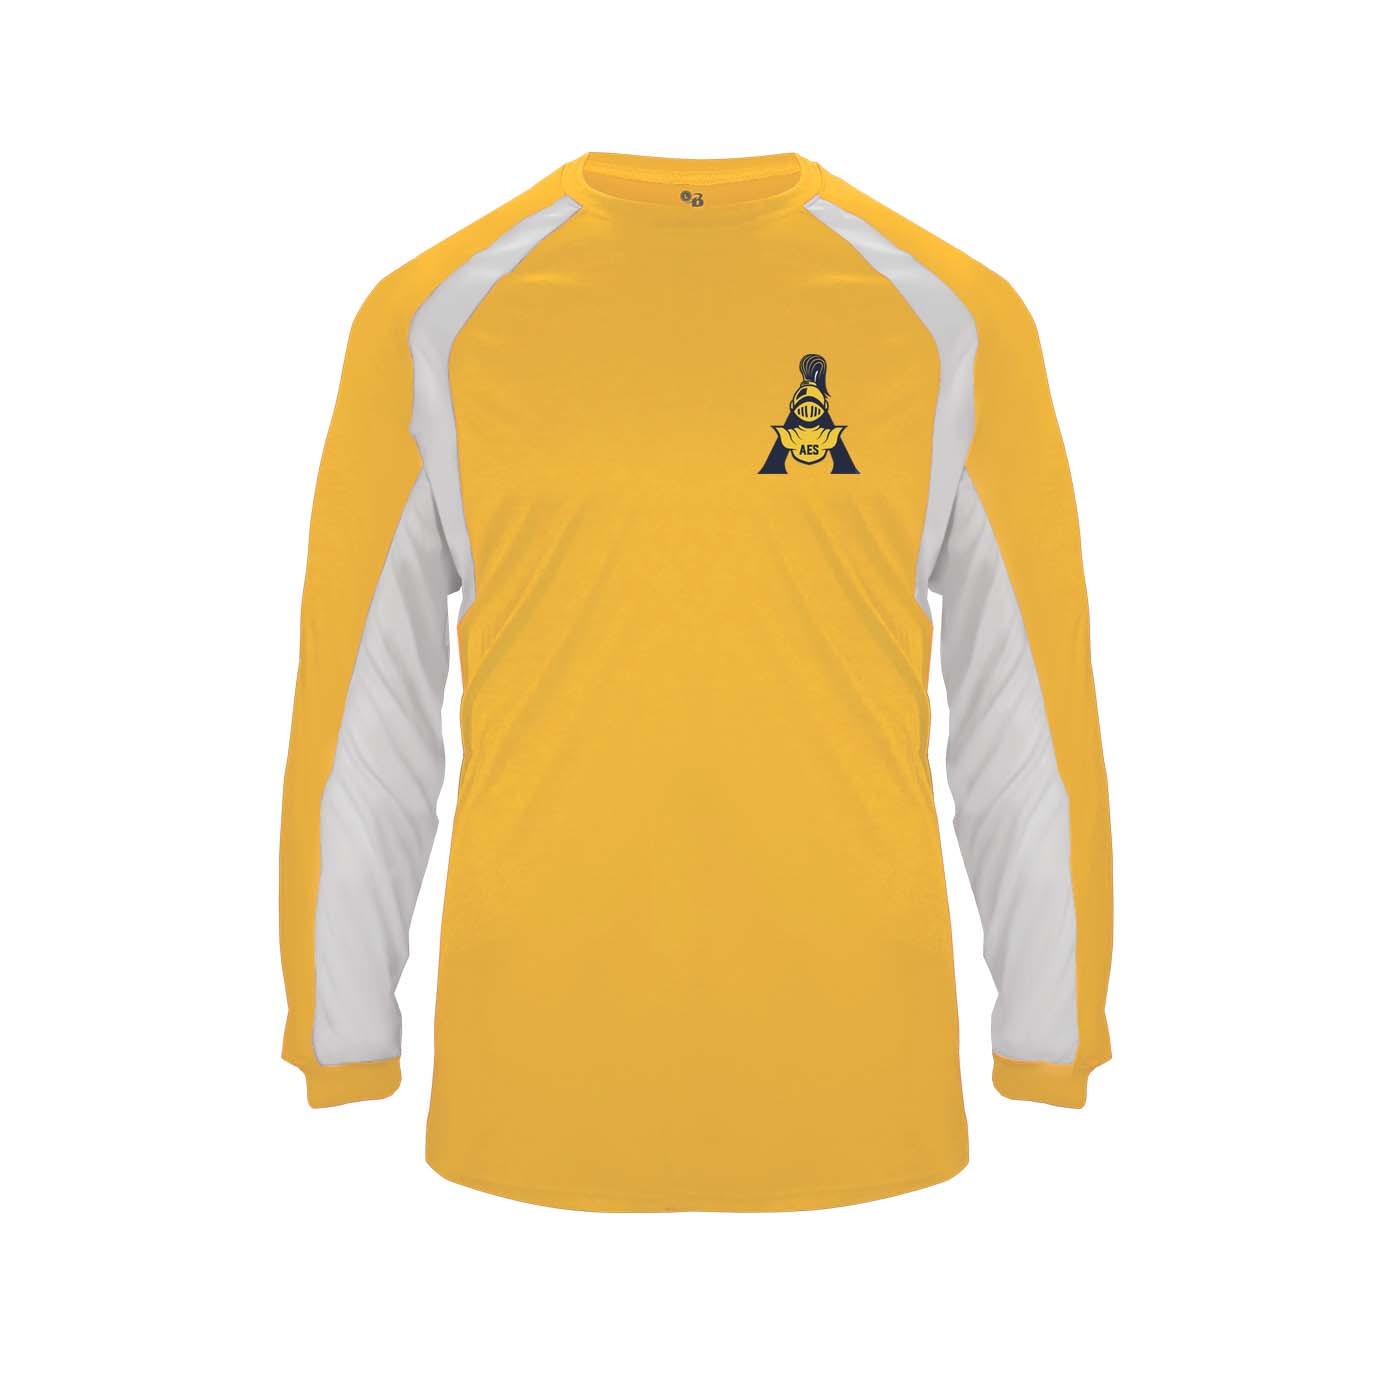 ANN Spirit Hook L/S T-Shirt w/ AES Logo - Please Allow 2-3 Weeks for Delivery